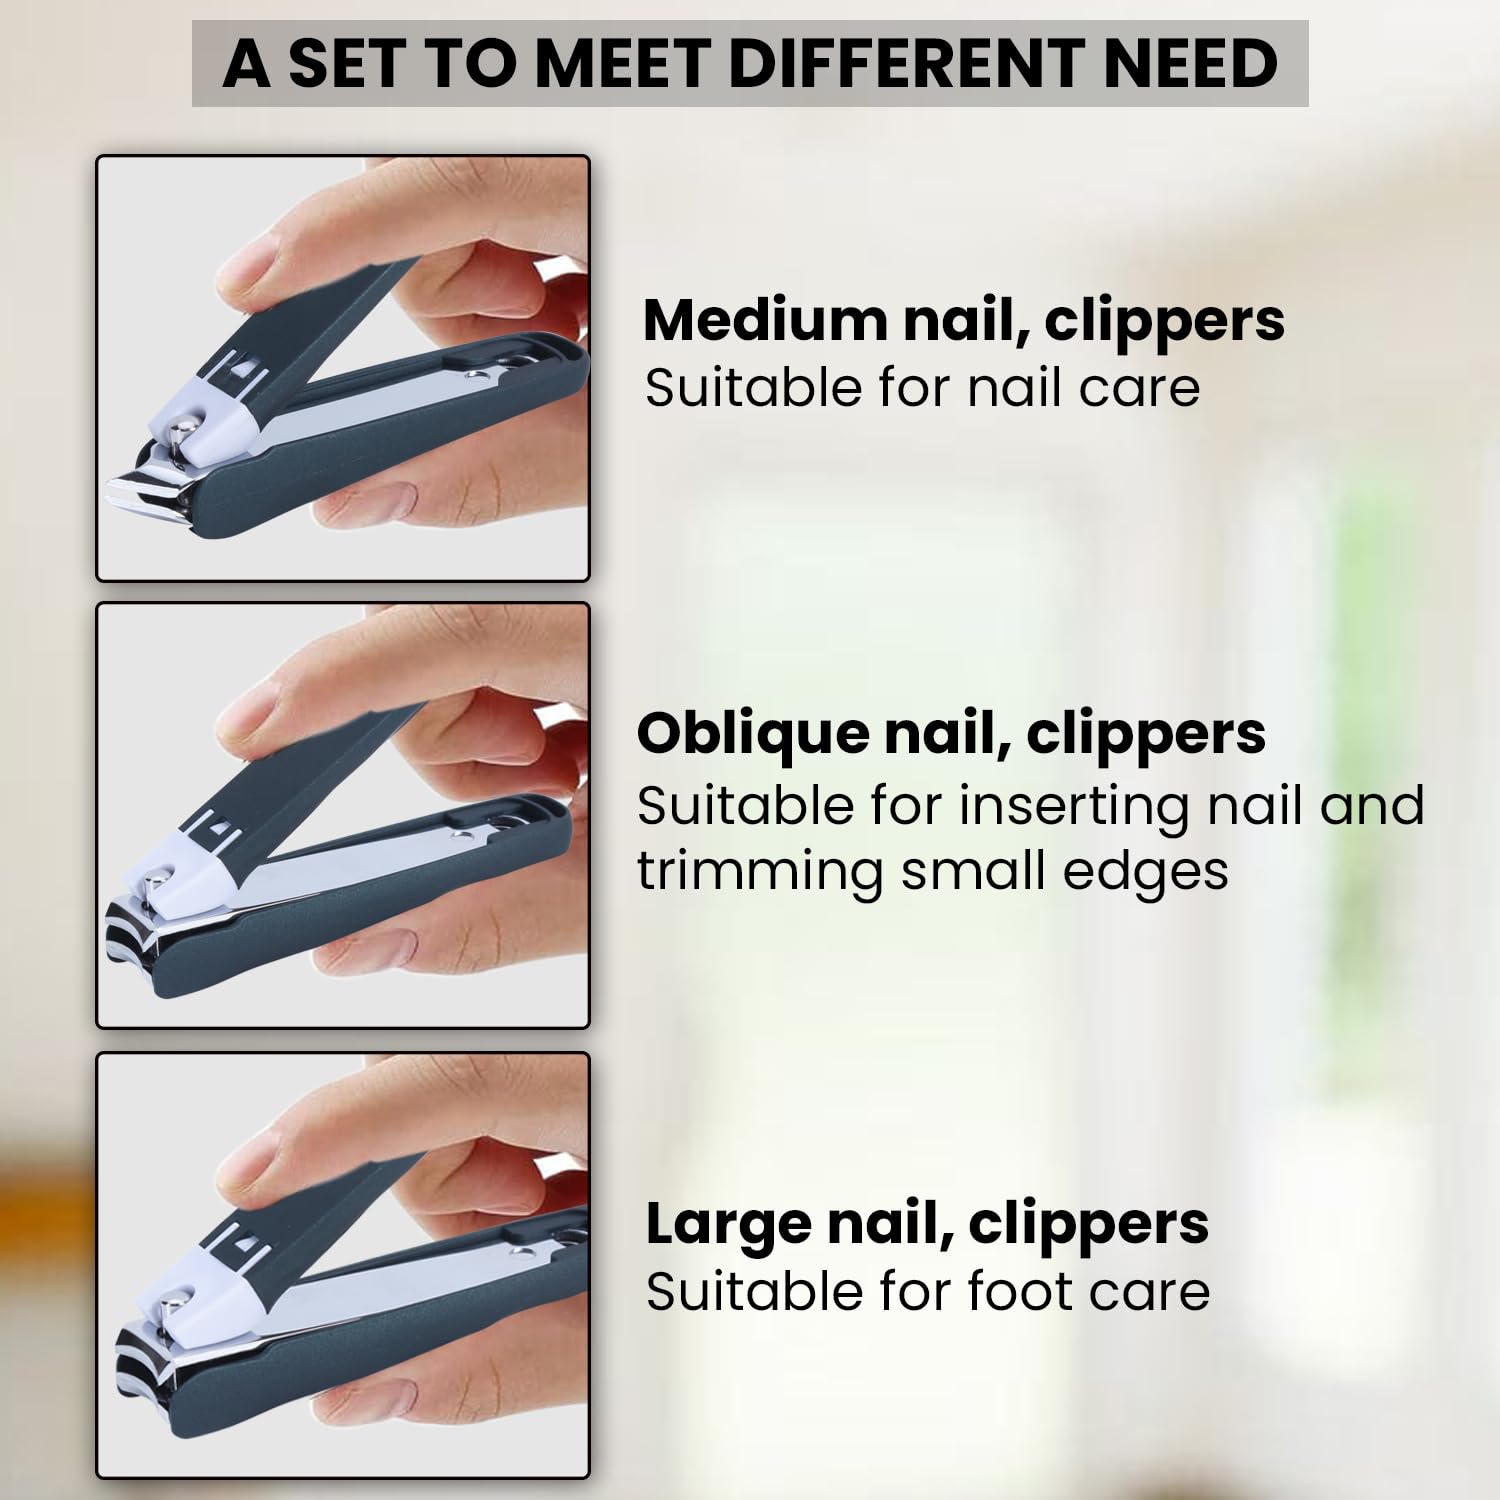 Buy GERMANIKURE Professional Nail Clipper Set - 2 Large Toenail Clippers  with Leather Cases - Ethically Made in Solingen Germany - FINOX Surgical  Stainless Steel Manicure and Pedicure Tools Online at Low